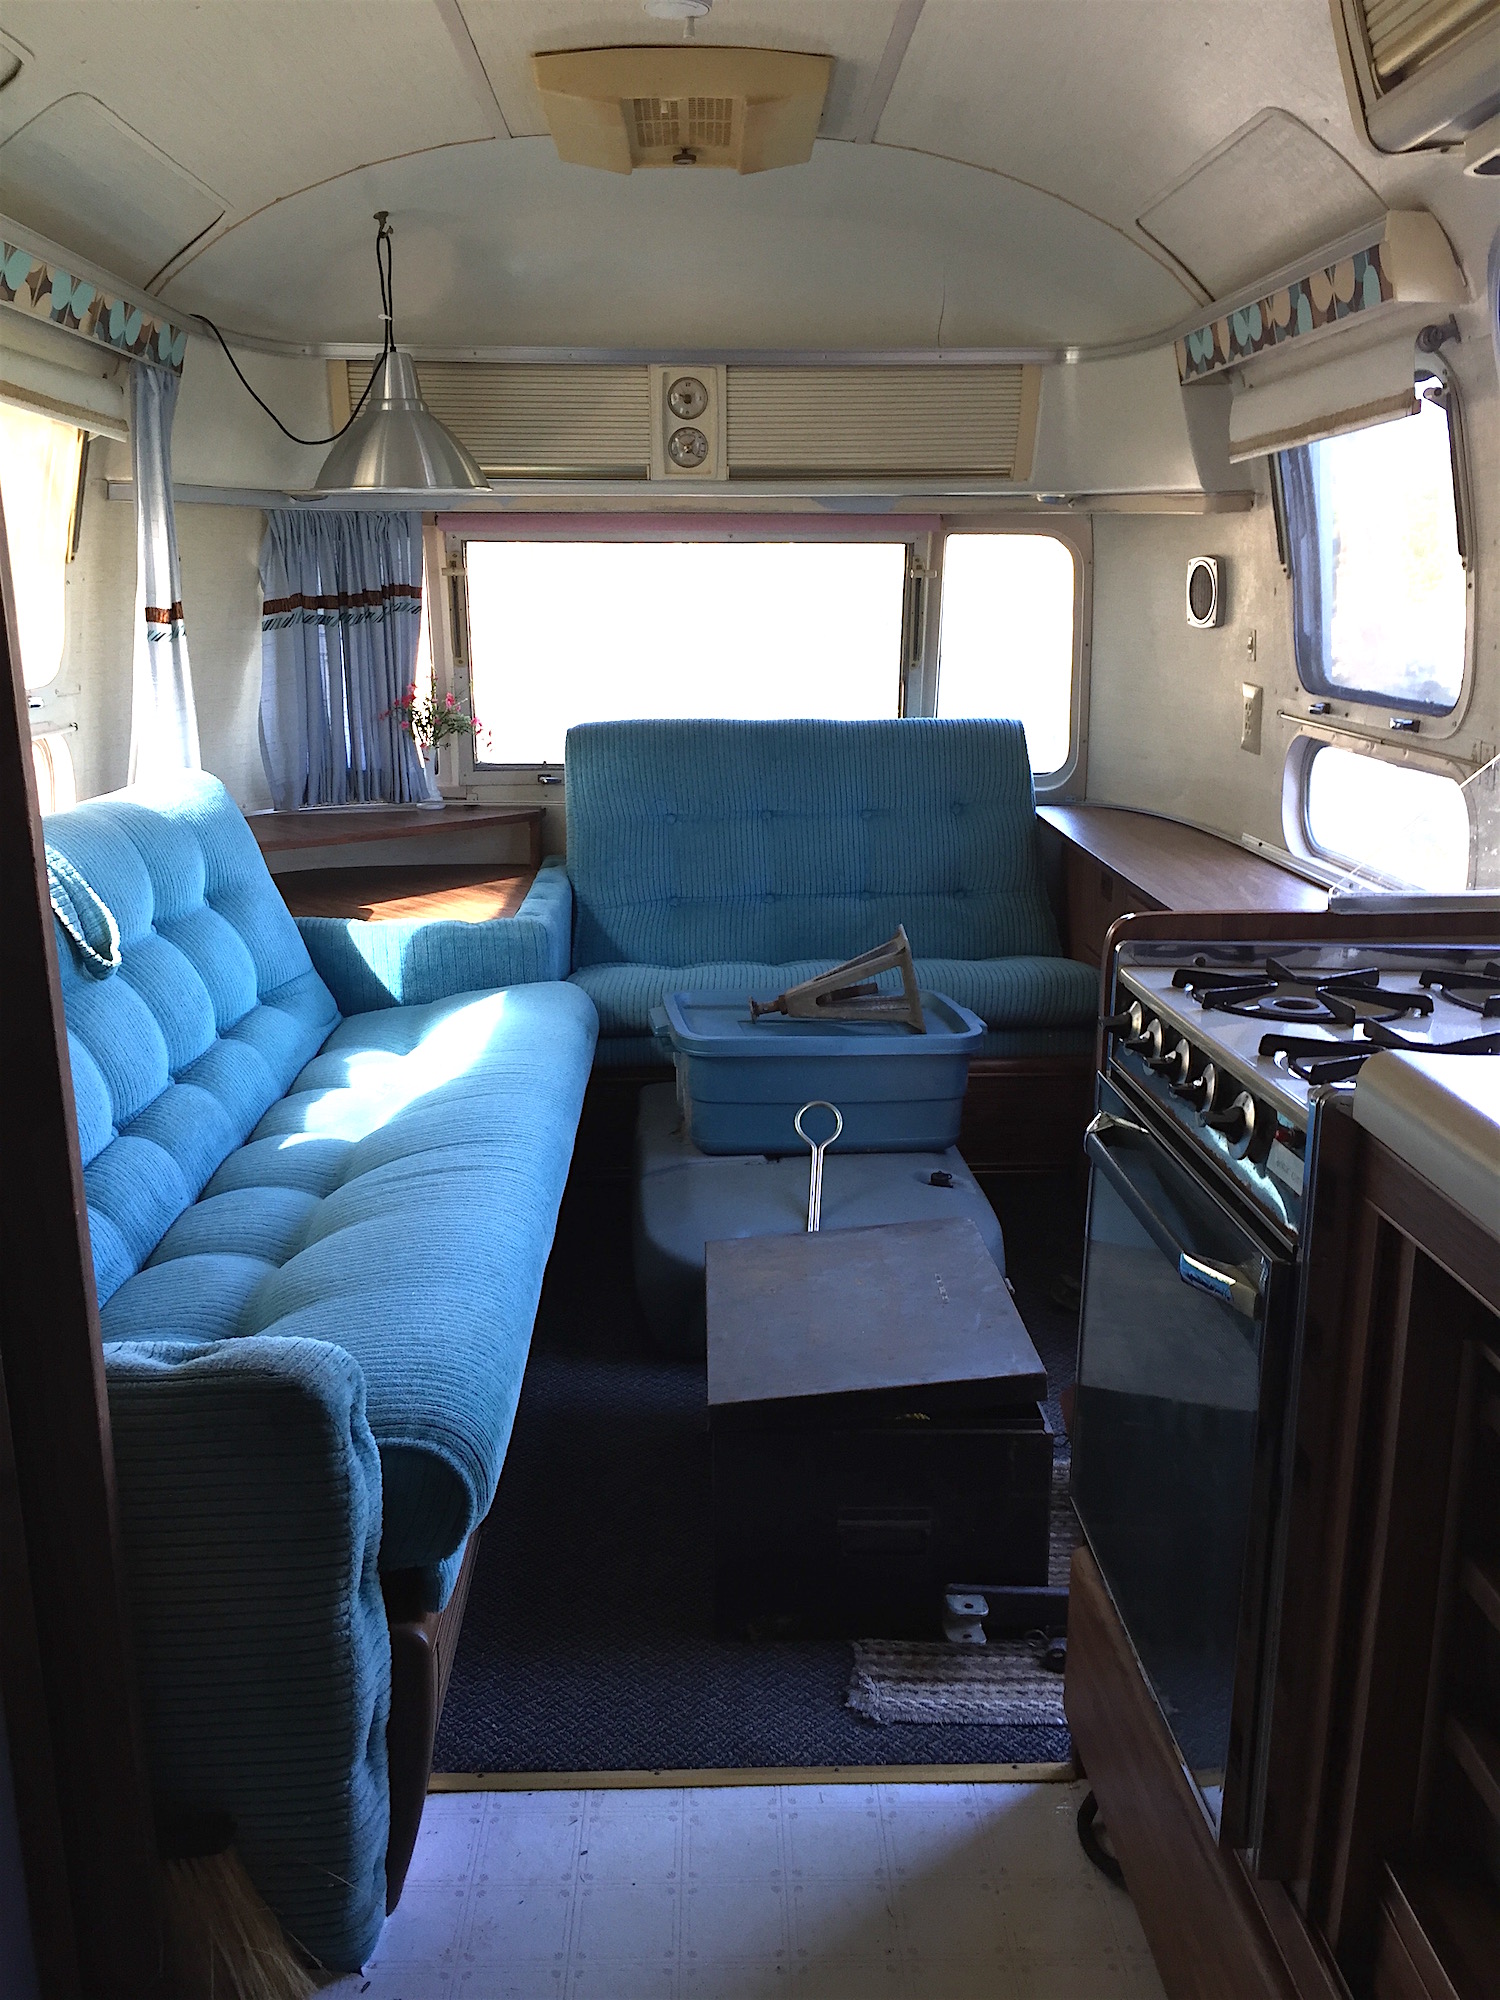 It's hard to believe from this photo.. what a transformation can happen with a vintage airstream! Click on the photo to see the before and after pics of the gorgeous airstream now!! 